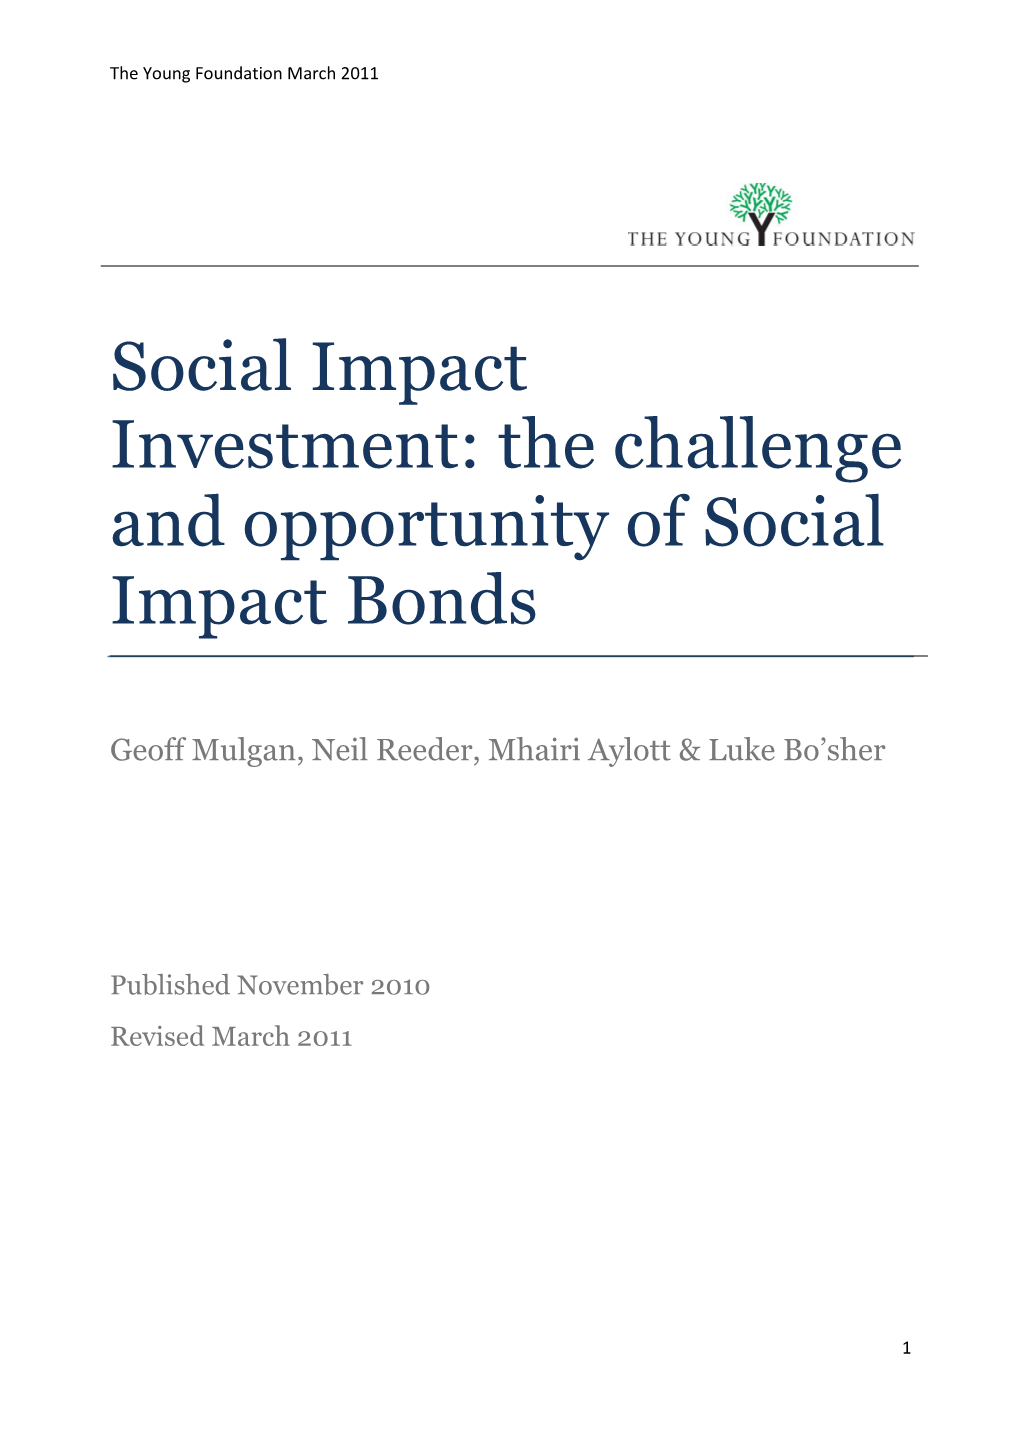 The Challenge and Opportunity of Social Impact Bonds